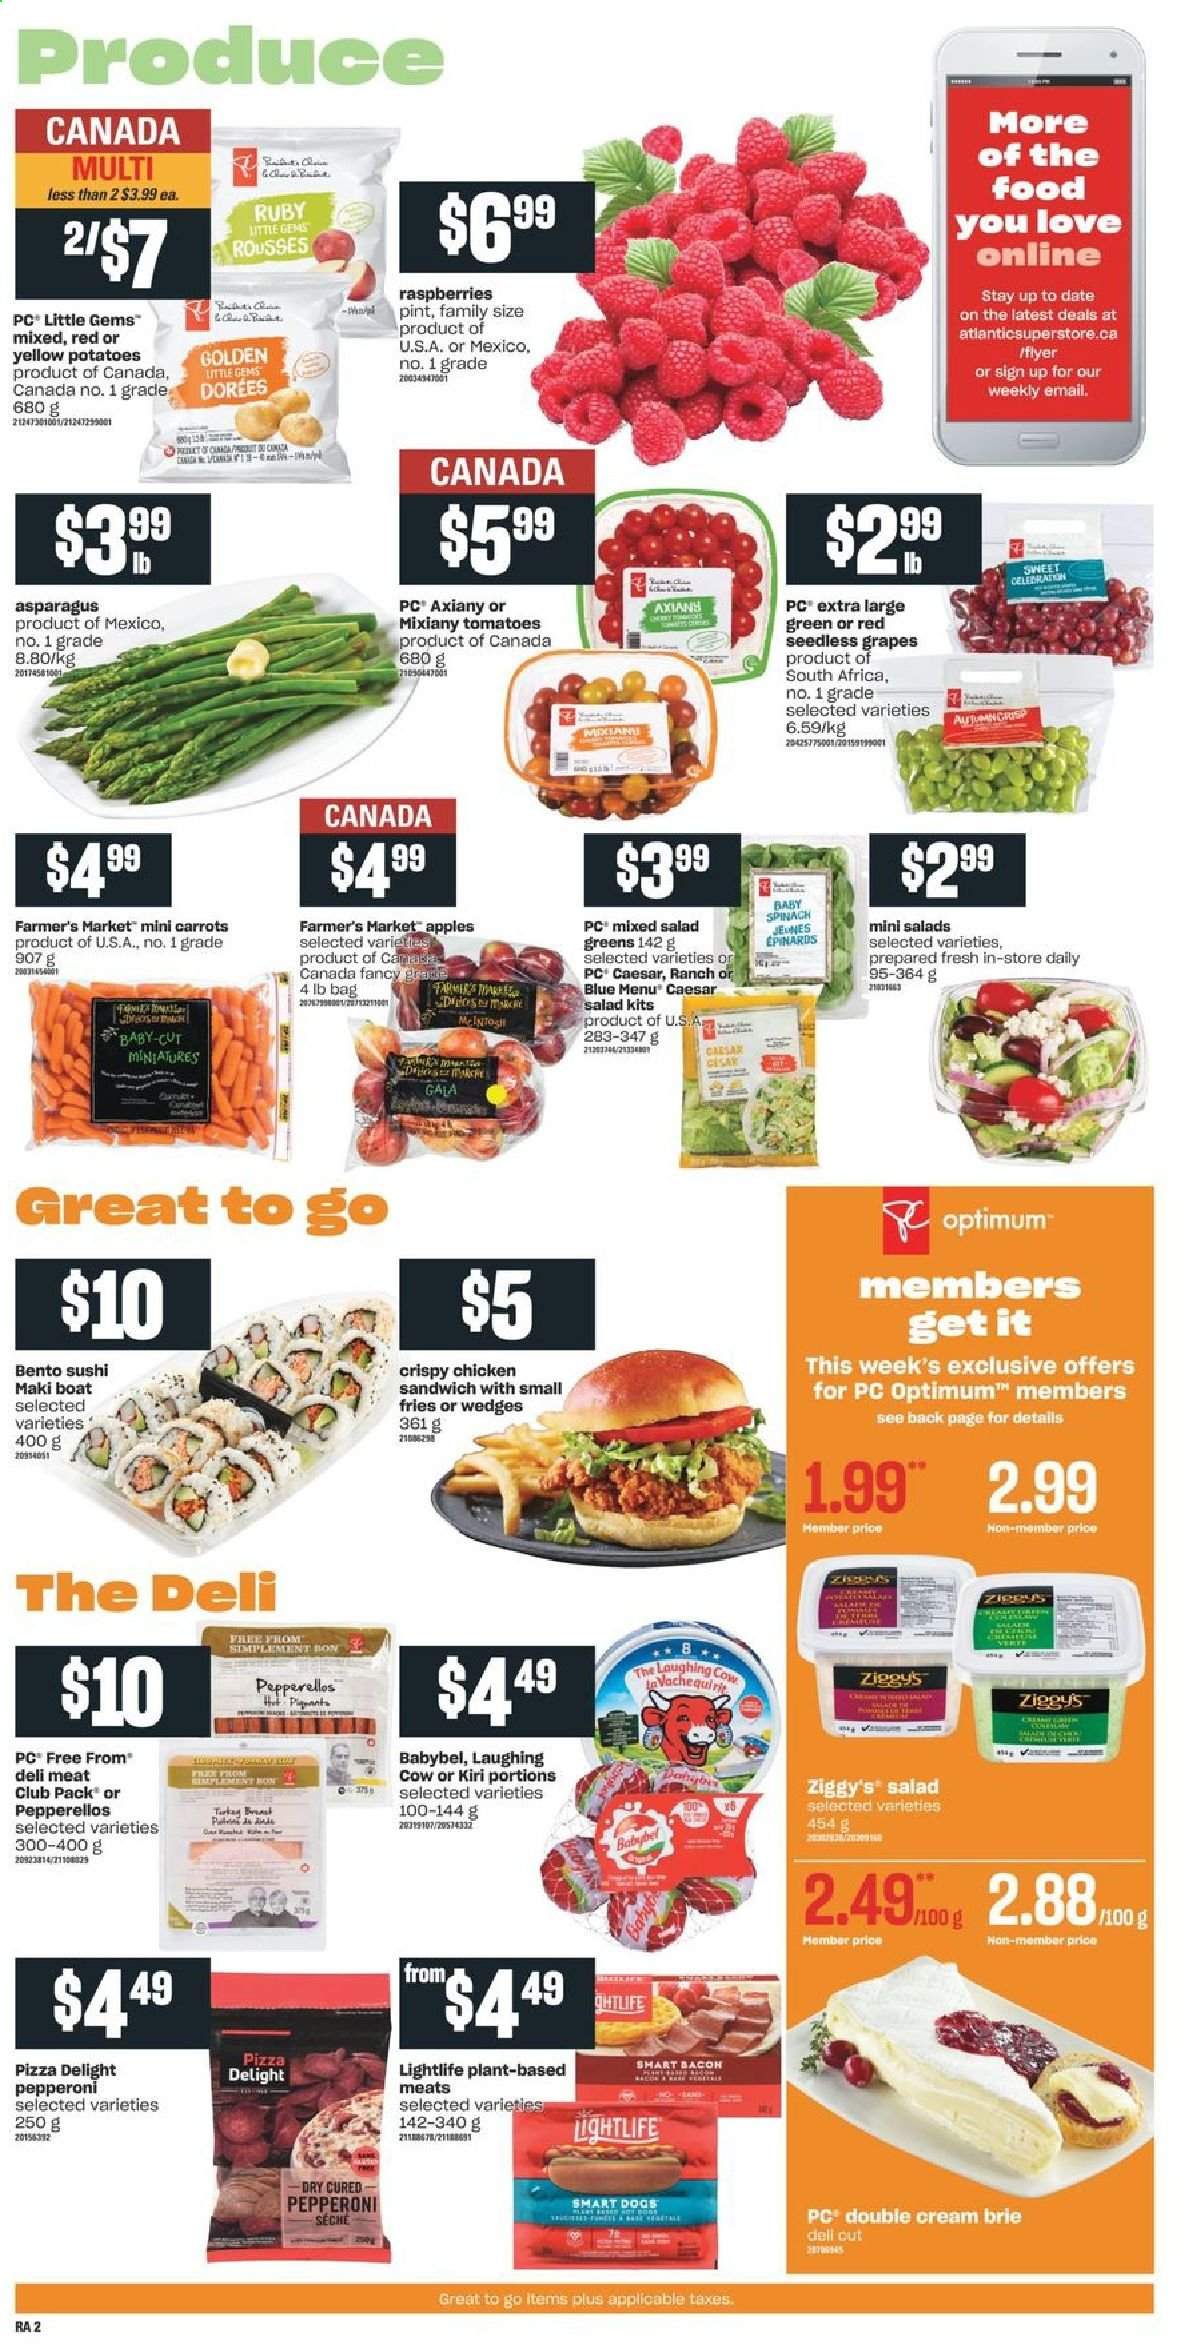 thumbnail - Atlantic Superstore Flyer - March 18, 2021 - March 24, 2021 - Sales products - asparagus, carrots, potatoes, salad, salad greens, apples, Gala, grapes, seedless grapes, pizza, sandwich, pepperoni, brie, Kiri, The Laughing Cow, Babybel, potato fries, Optimum. Page 3.